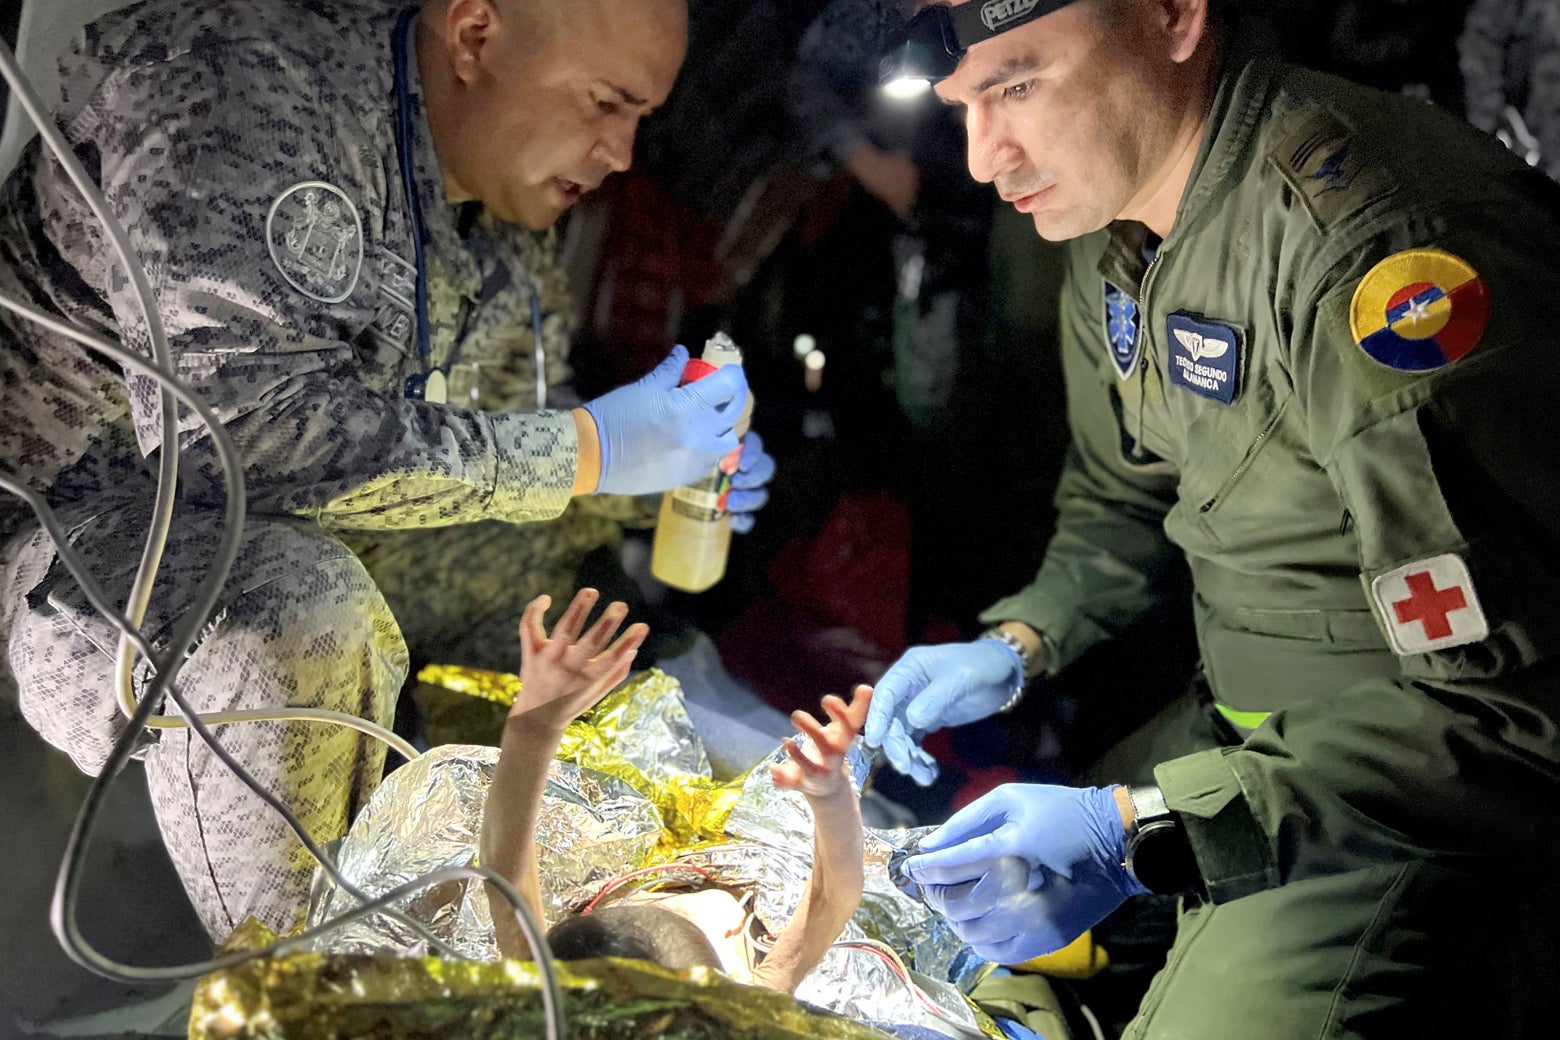 Two men in military uniforms, medics, tend to a baby whose arms are in the air. The baby is hooked up to various tubes and is in a makeshift hospital bed.